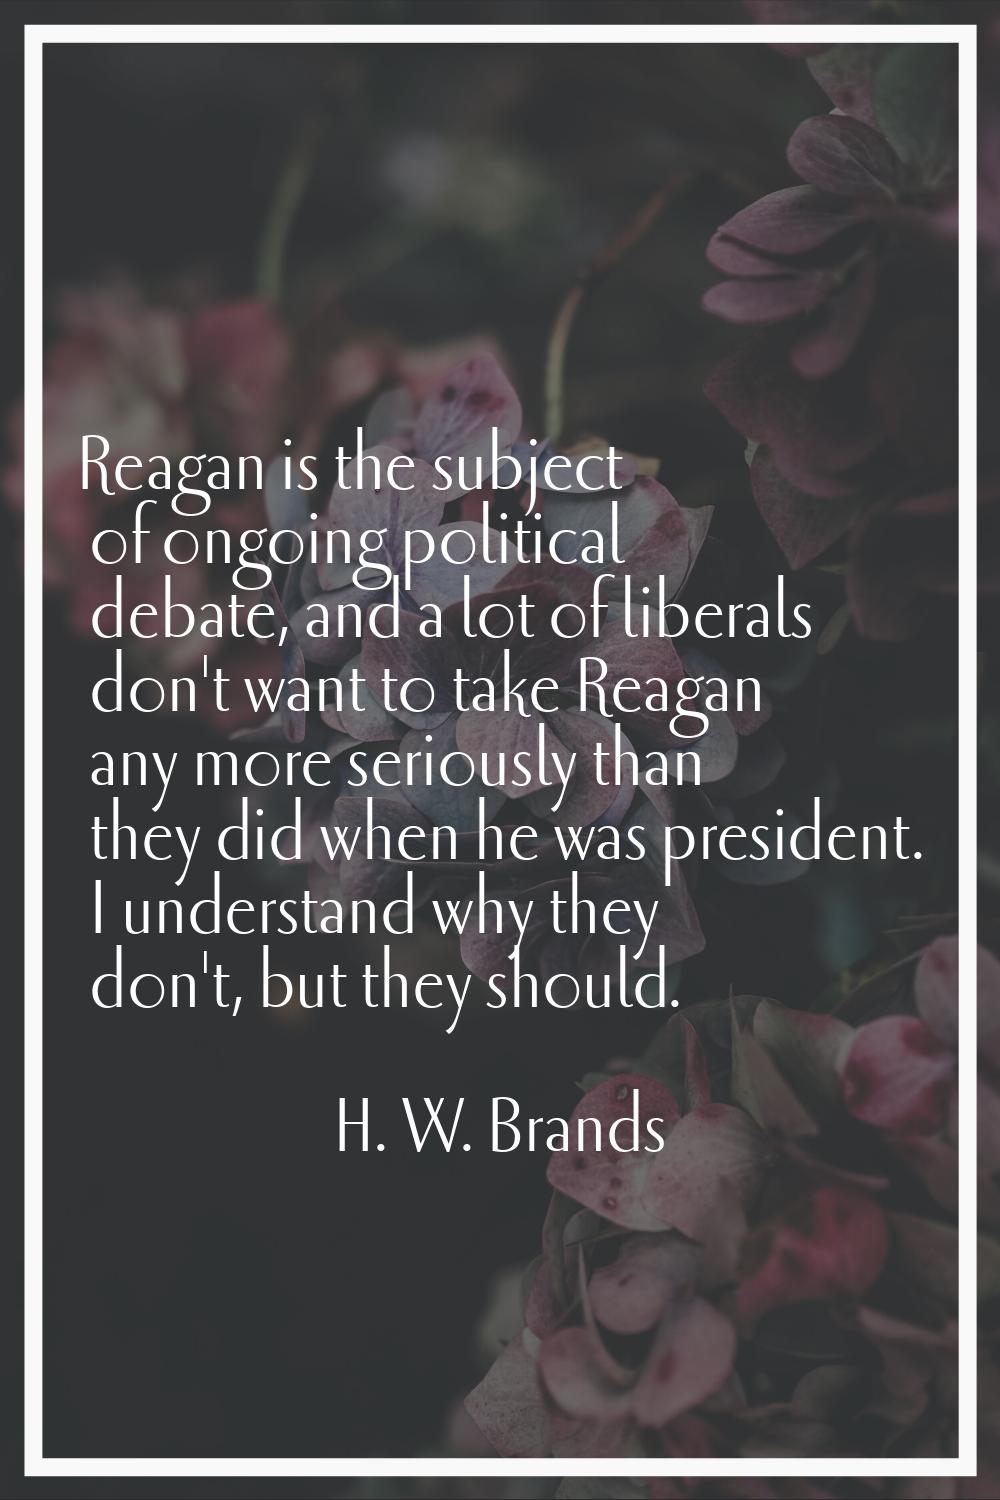 Reagan is the subject of ongoing political debate, and a lot of liberals don't want to take Reagan 